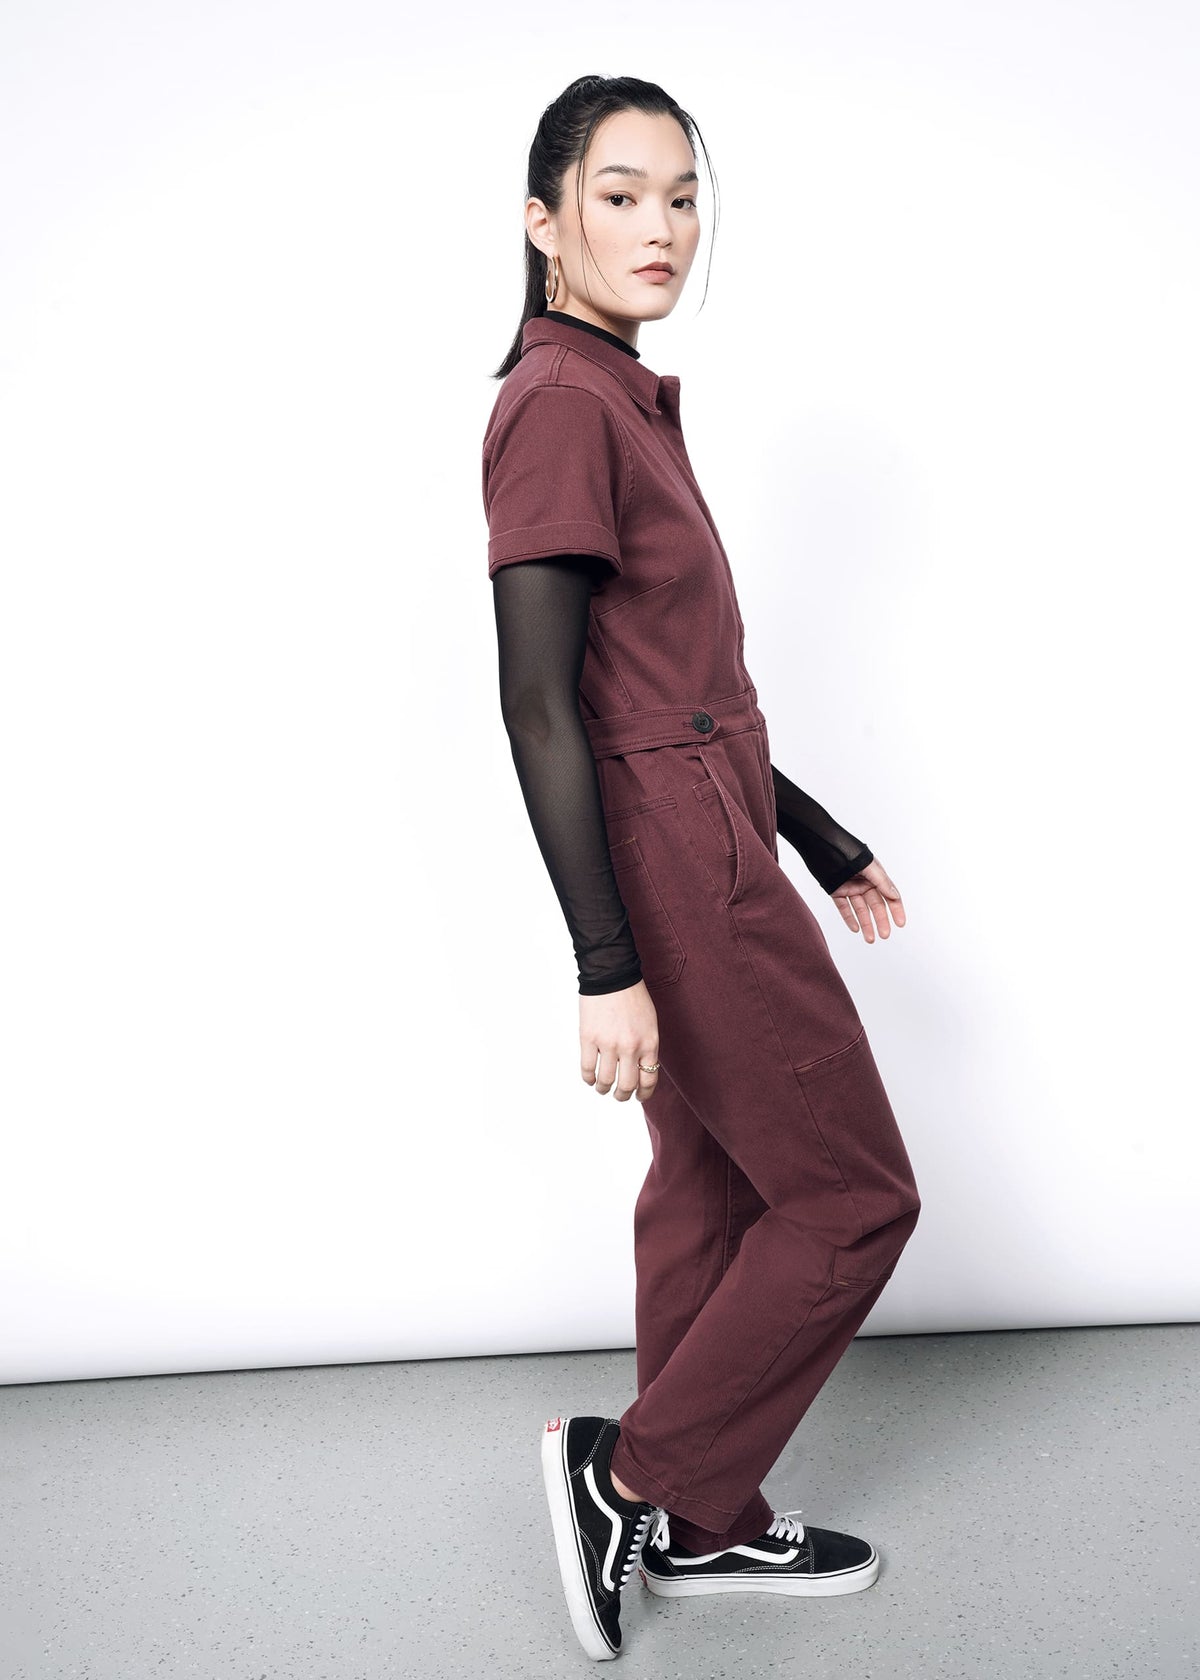 The Essential Denim High Waisted Coverall in Merlot